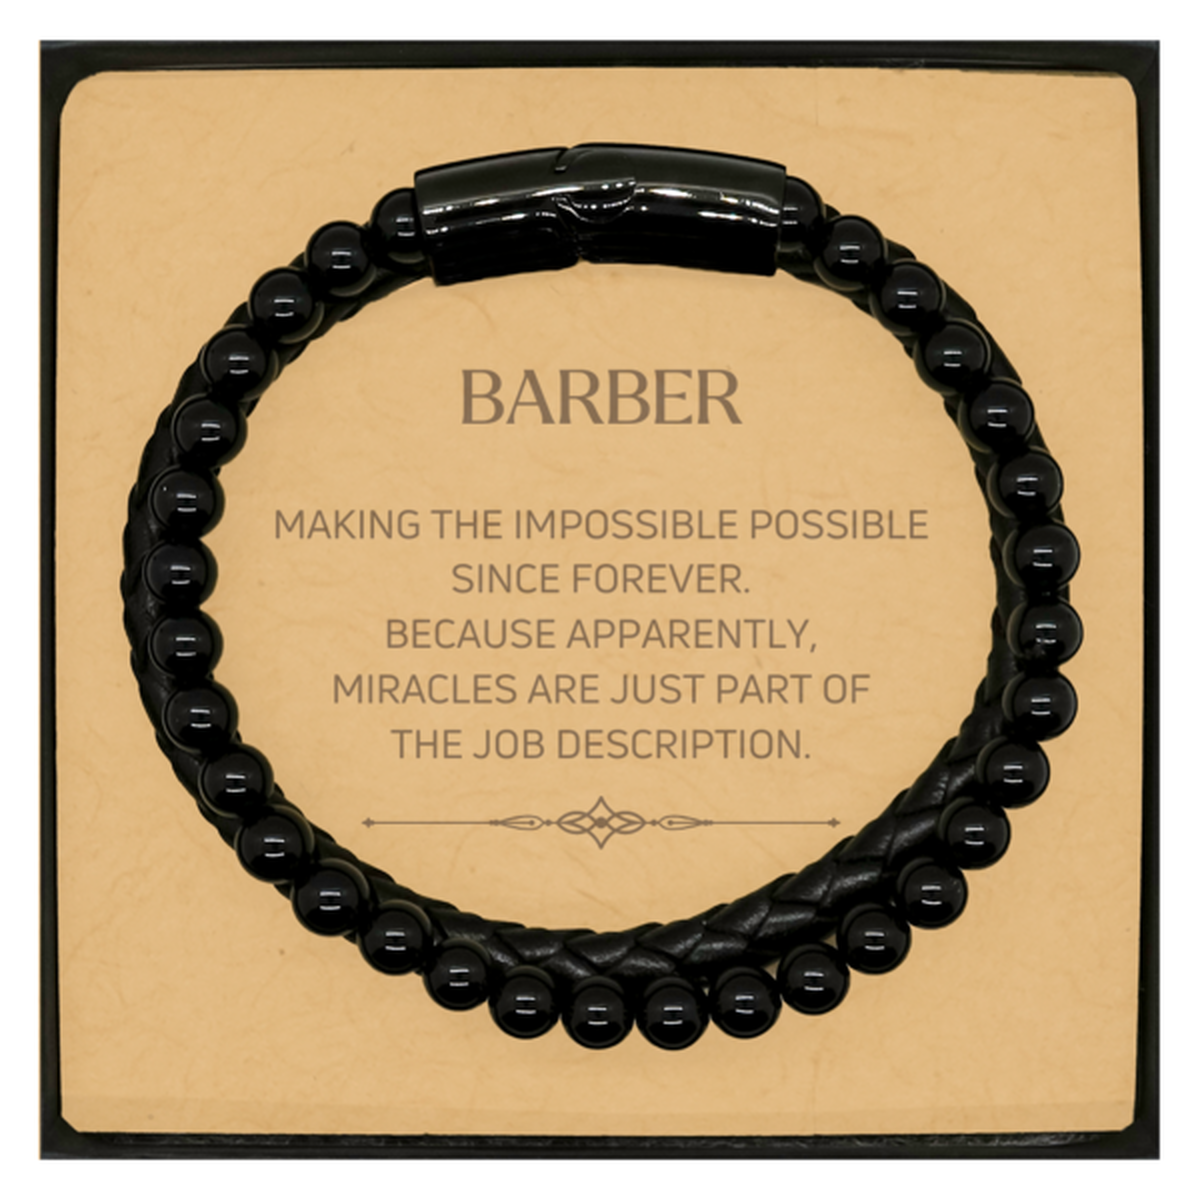 Funny Barber Gifts, Miracles are just part of the job description, Inspirational Birthday Christmas Stone Leather Bracelets For Barber, Men, Women, Coworkers, Friends, Boss